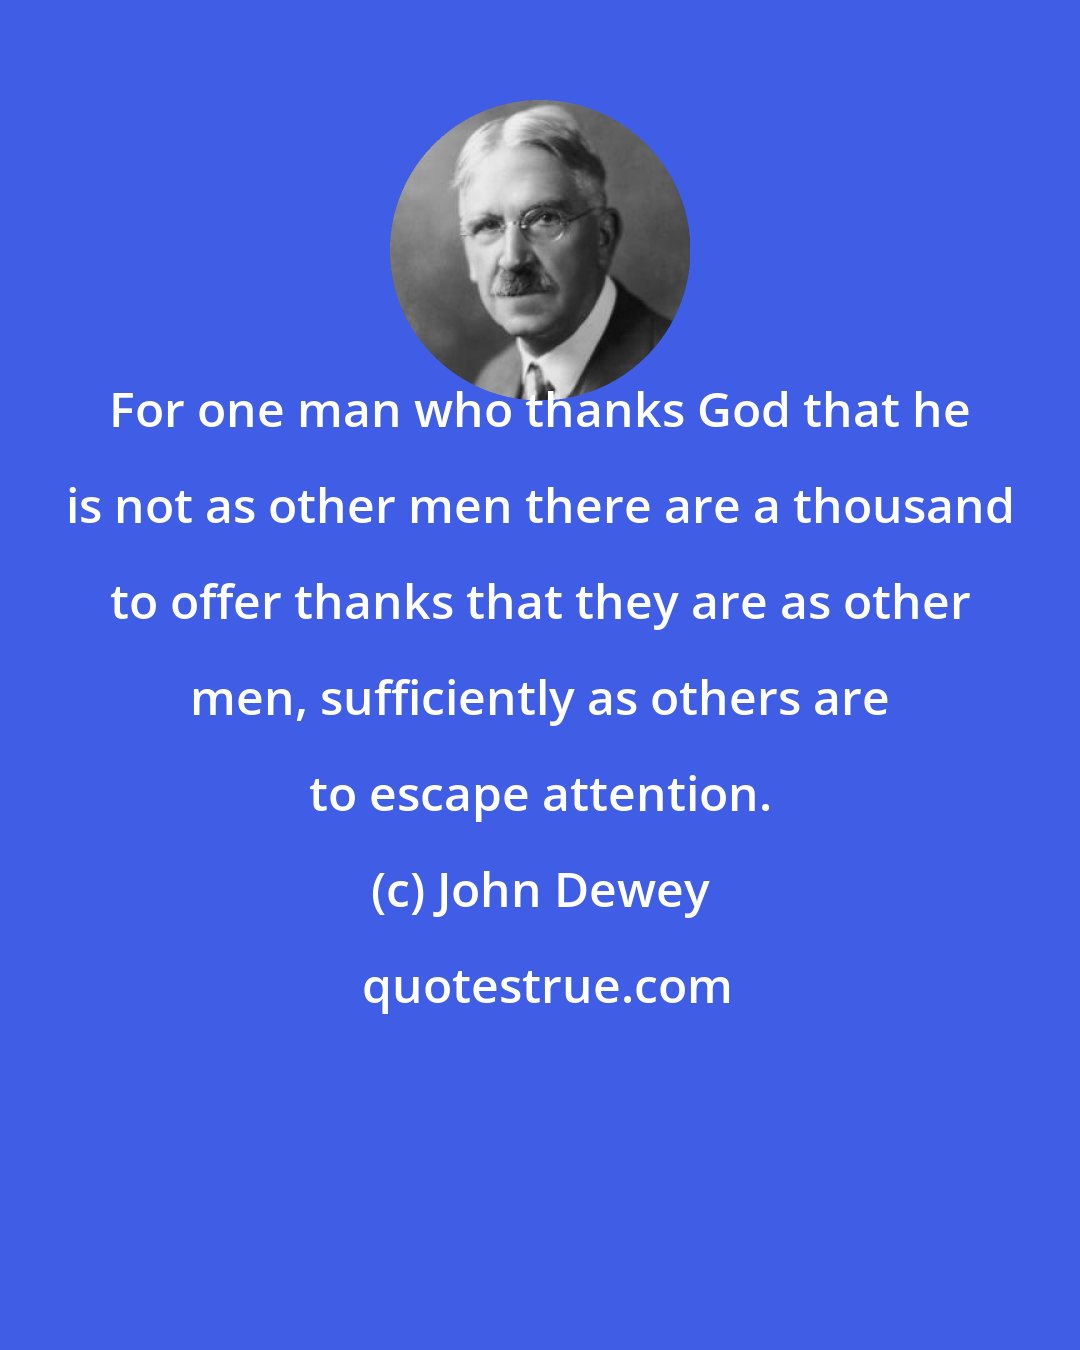 John Dewey: For one man who thanks God that he is not as other men there are a thousand to offer thanks that they are as other men, sufficiently as others are to escape attention.